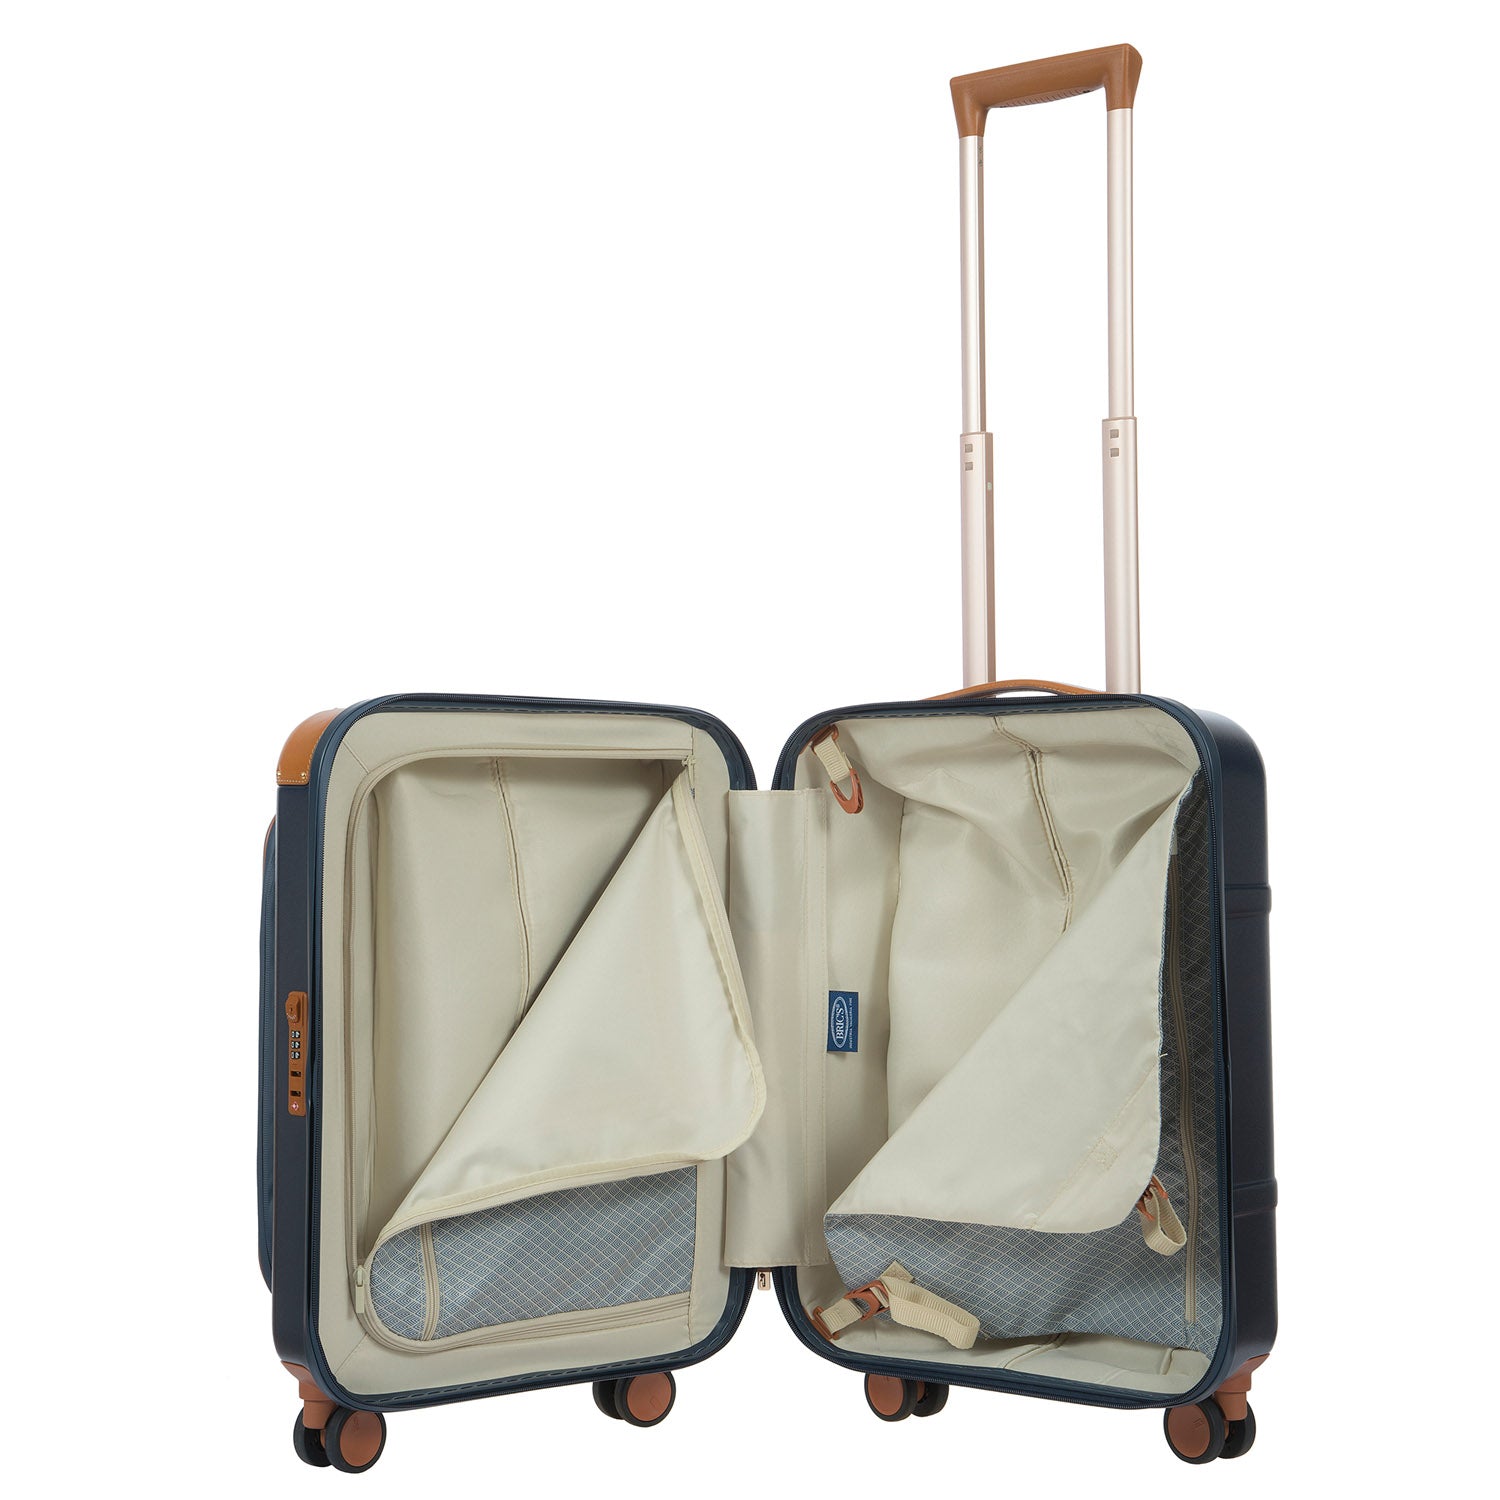 BRIC’S BELLAGIO business v2.0 21″ carry-on spinner